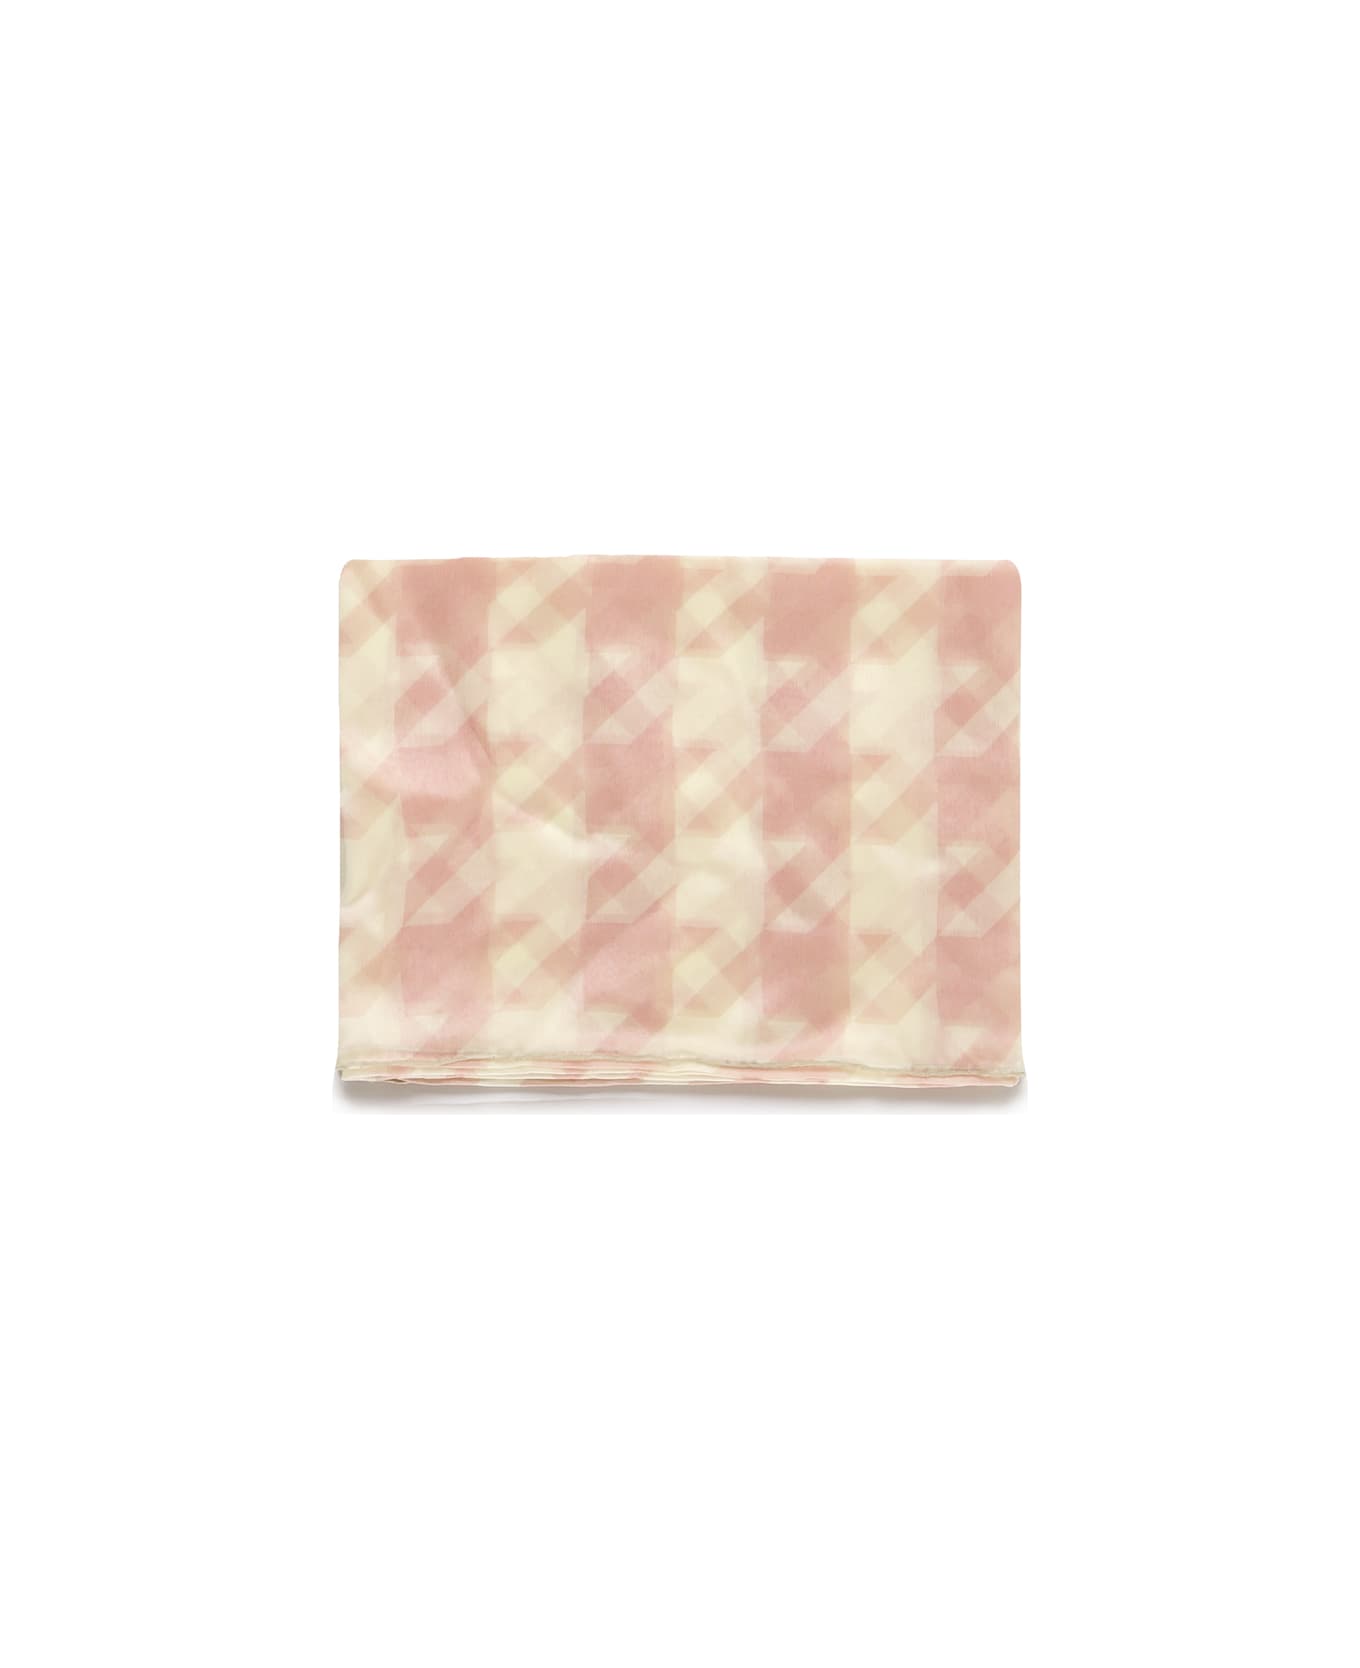 Burberry Silk Scarf With Houndstooth Pattern - Blush/sherbet